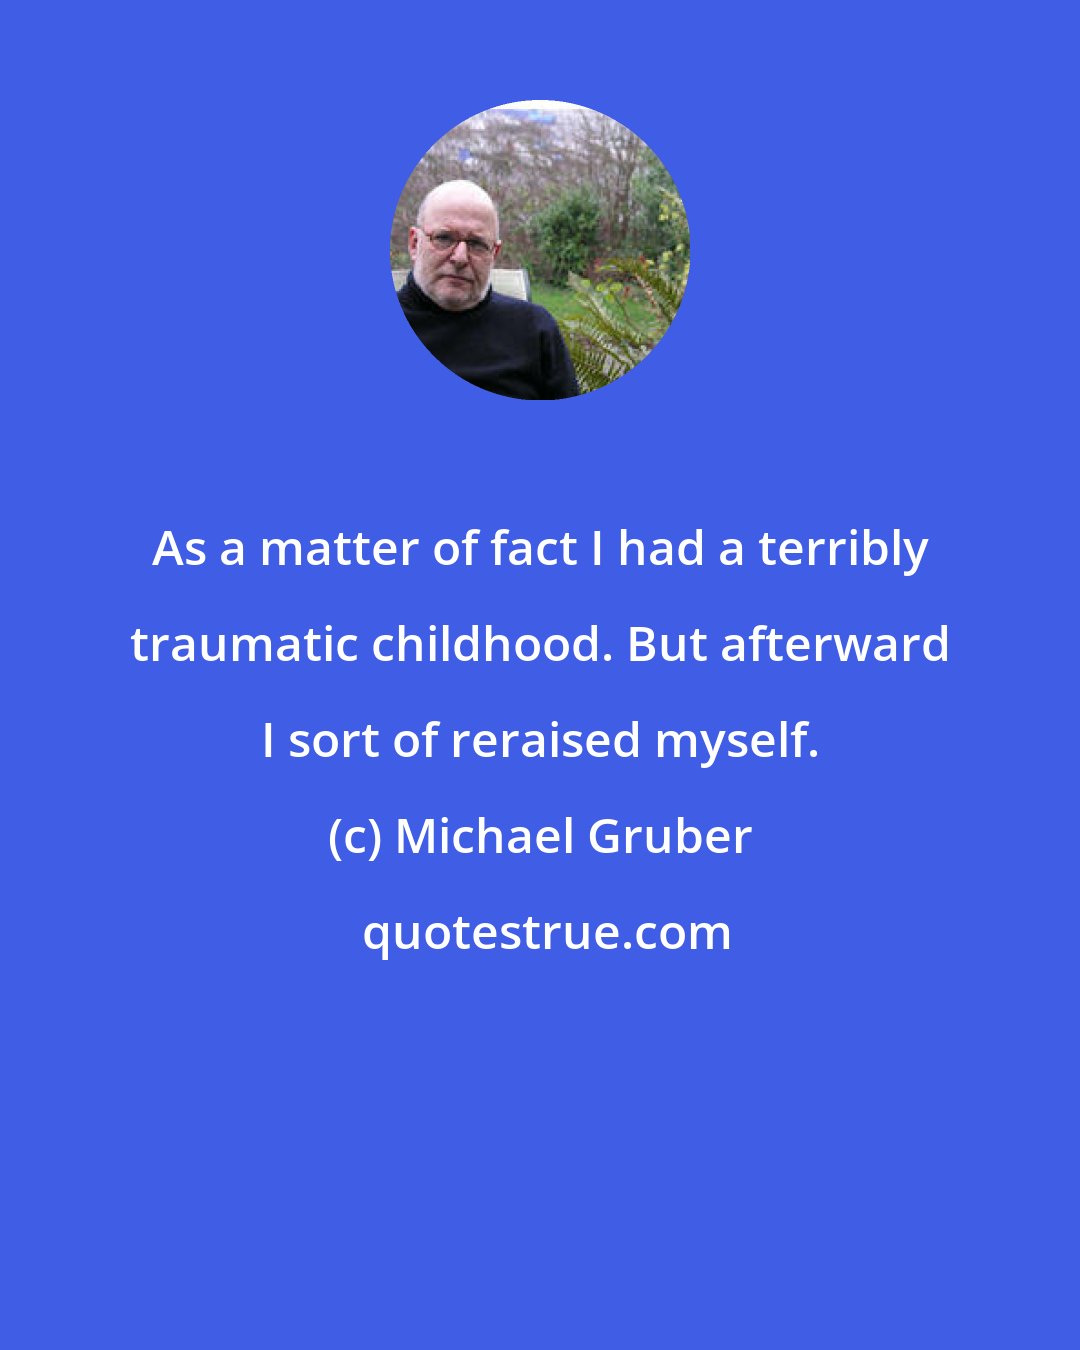 Michael Gruber: As a matter of fact I had a terribly traumatic childhood. But afterward I sort of reraised myself.